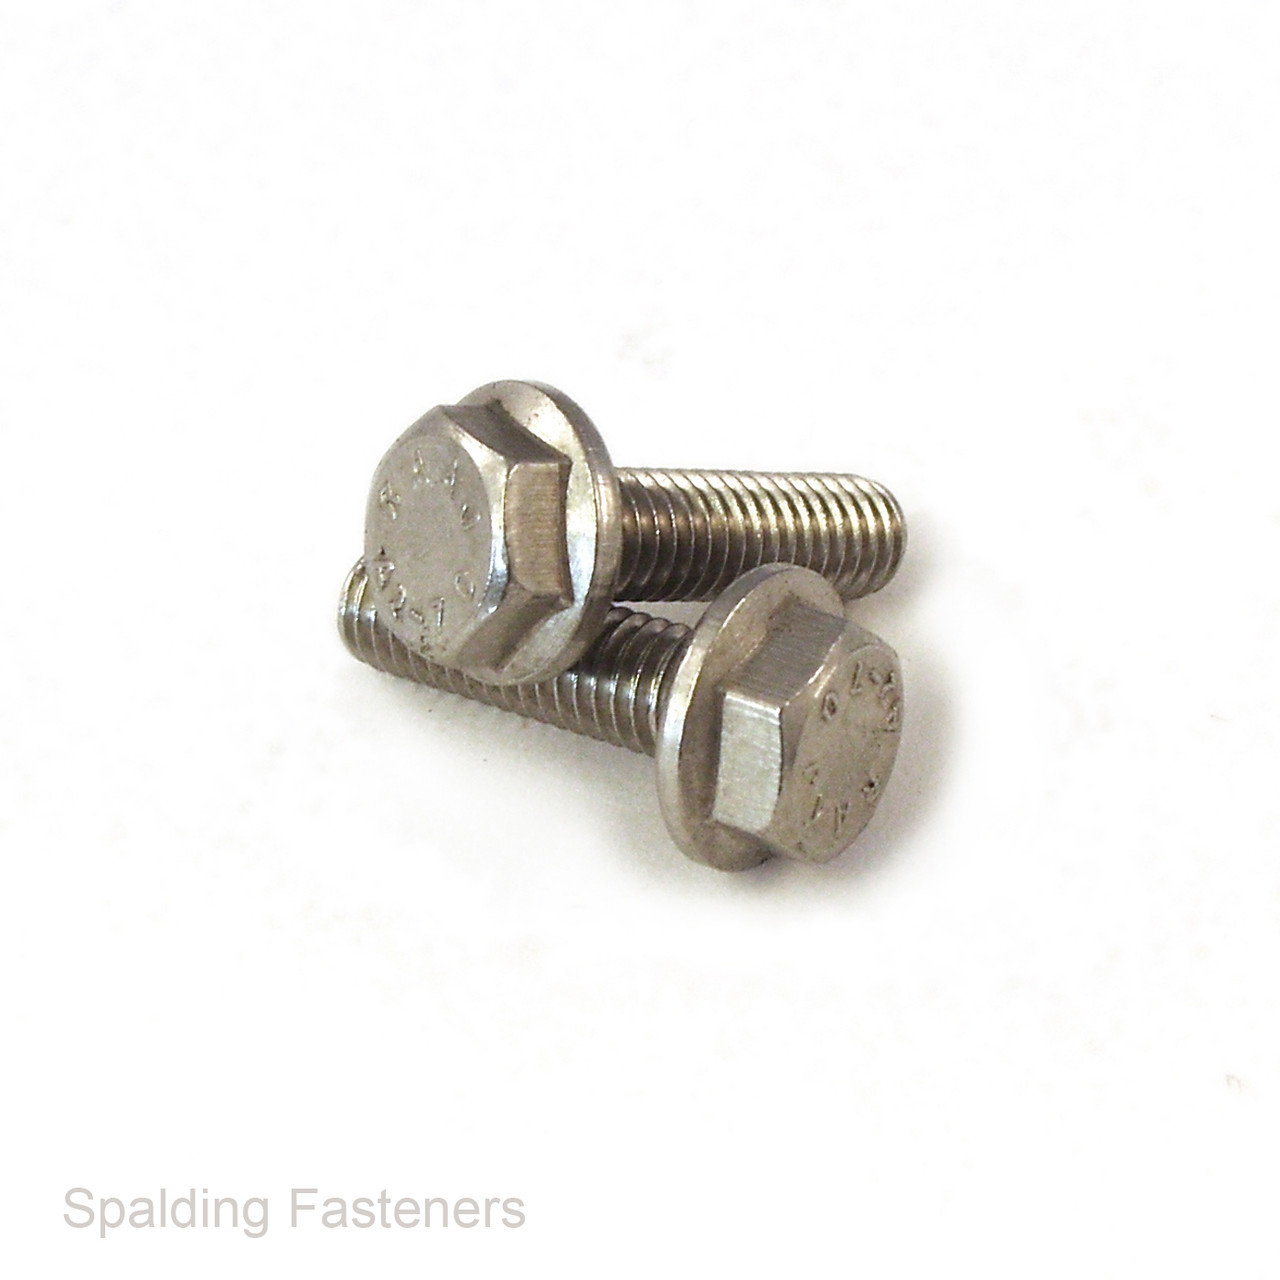 M6 METRIC 8.8 ZINC ASSORTED FLANGE BOLTS  NUTS ASSORTED SETS Spalding  Fasteners